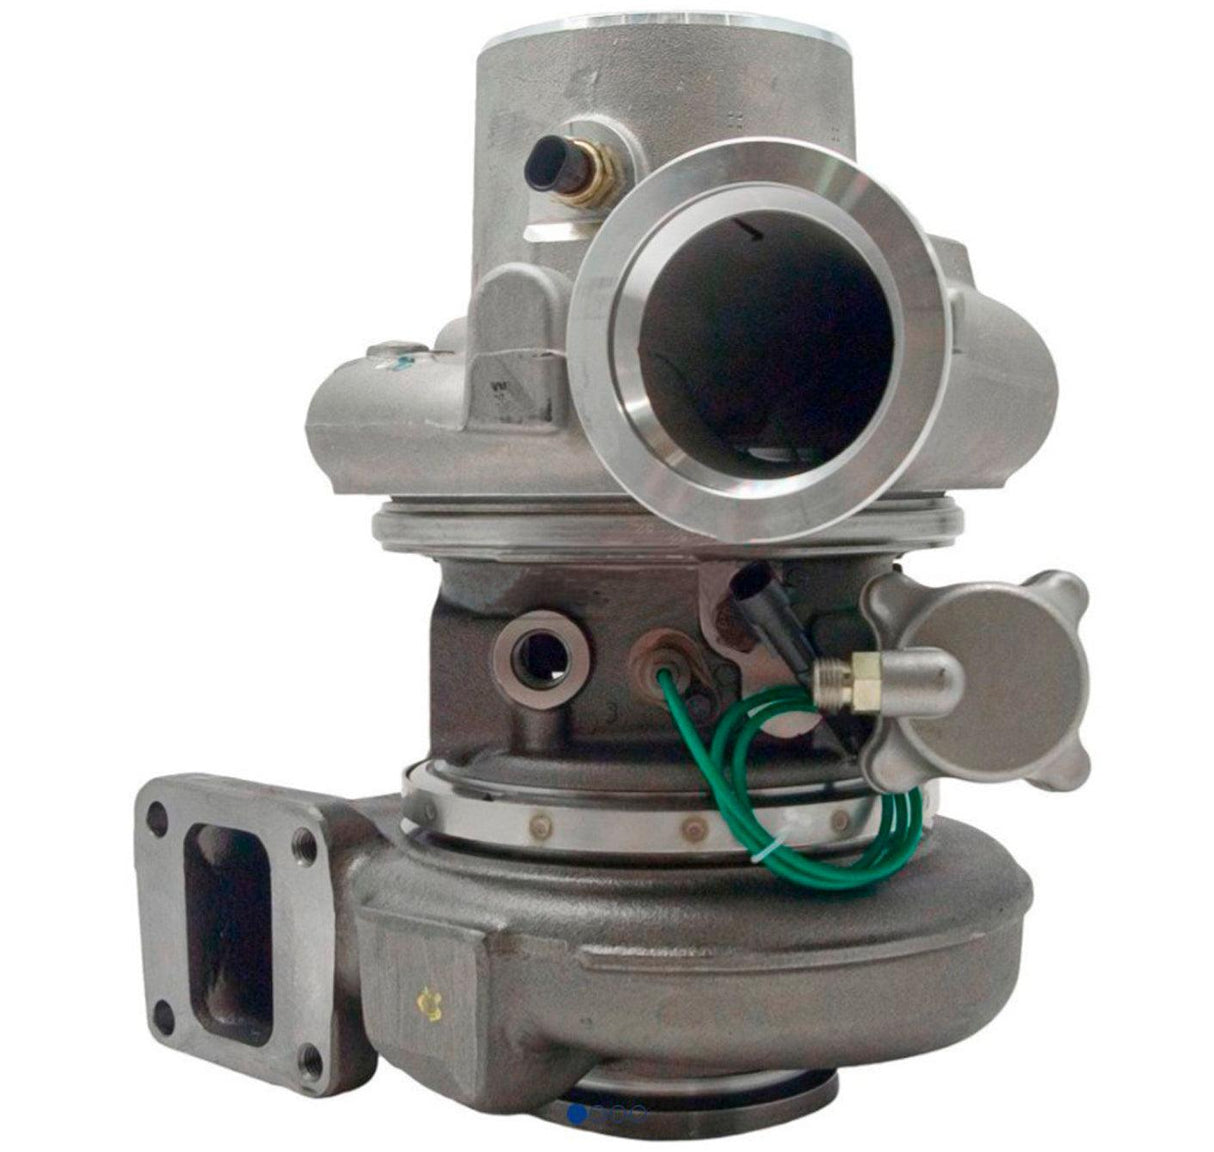 4035678 Genuine Cummins® Turbocharger With Actuator He551V For Isx.